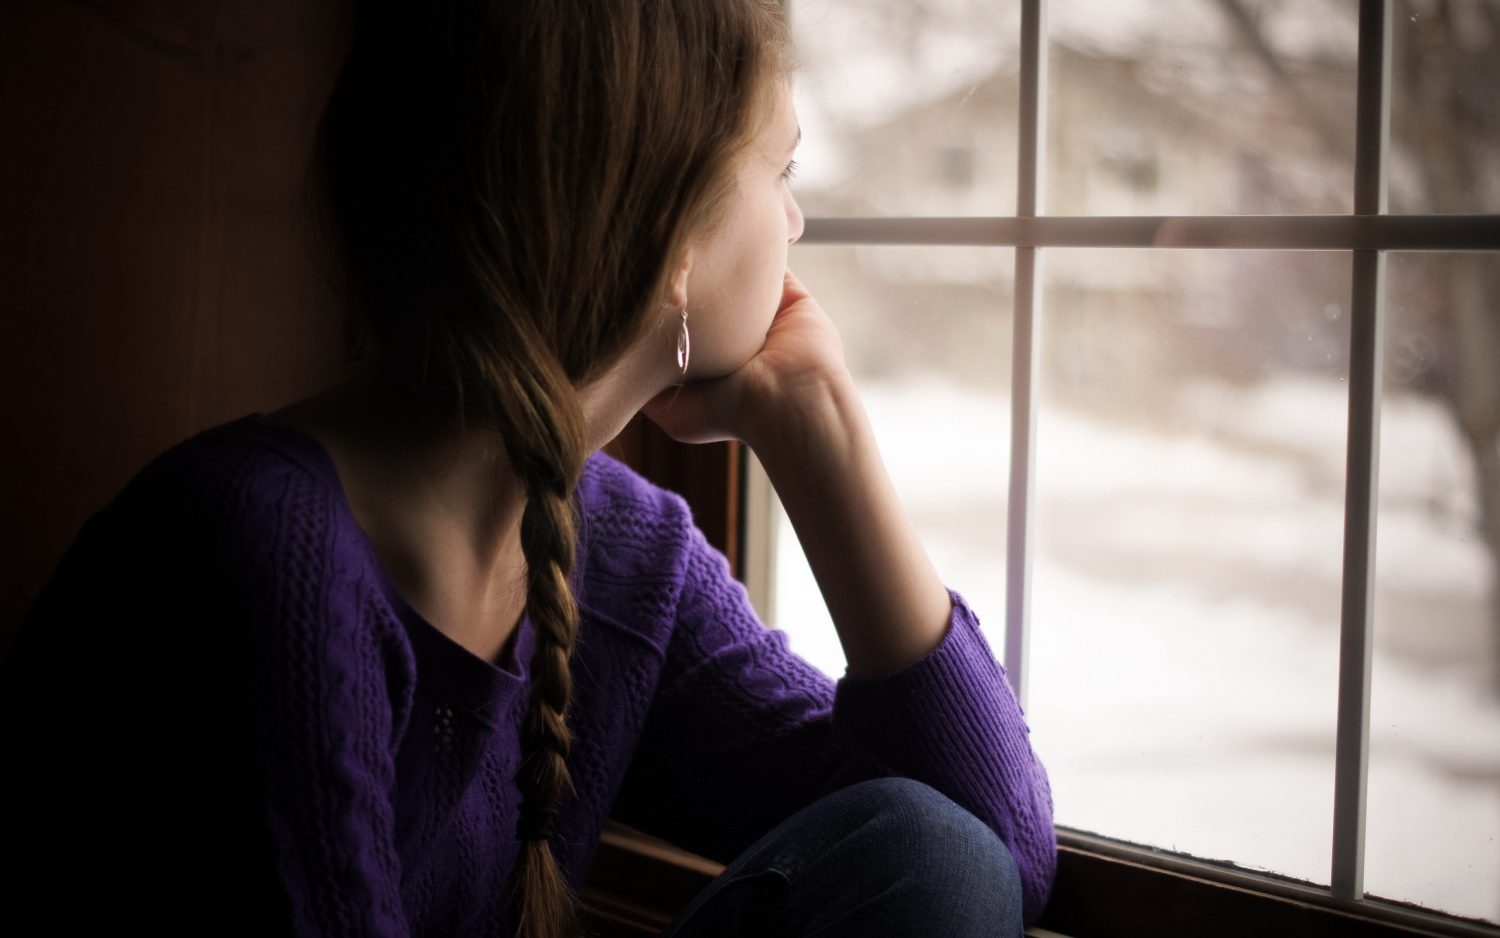 lool-out-girl-thinking-photography-winter-window-hd-wallpaper